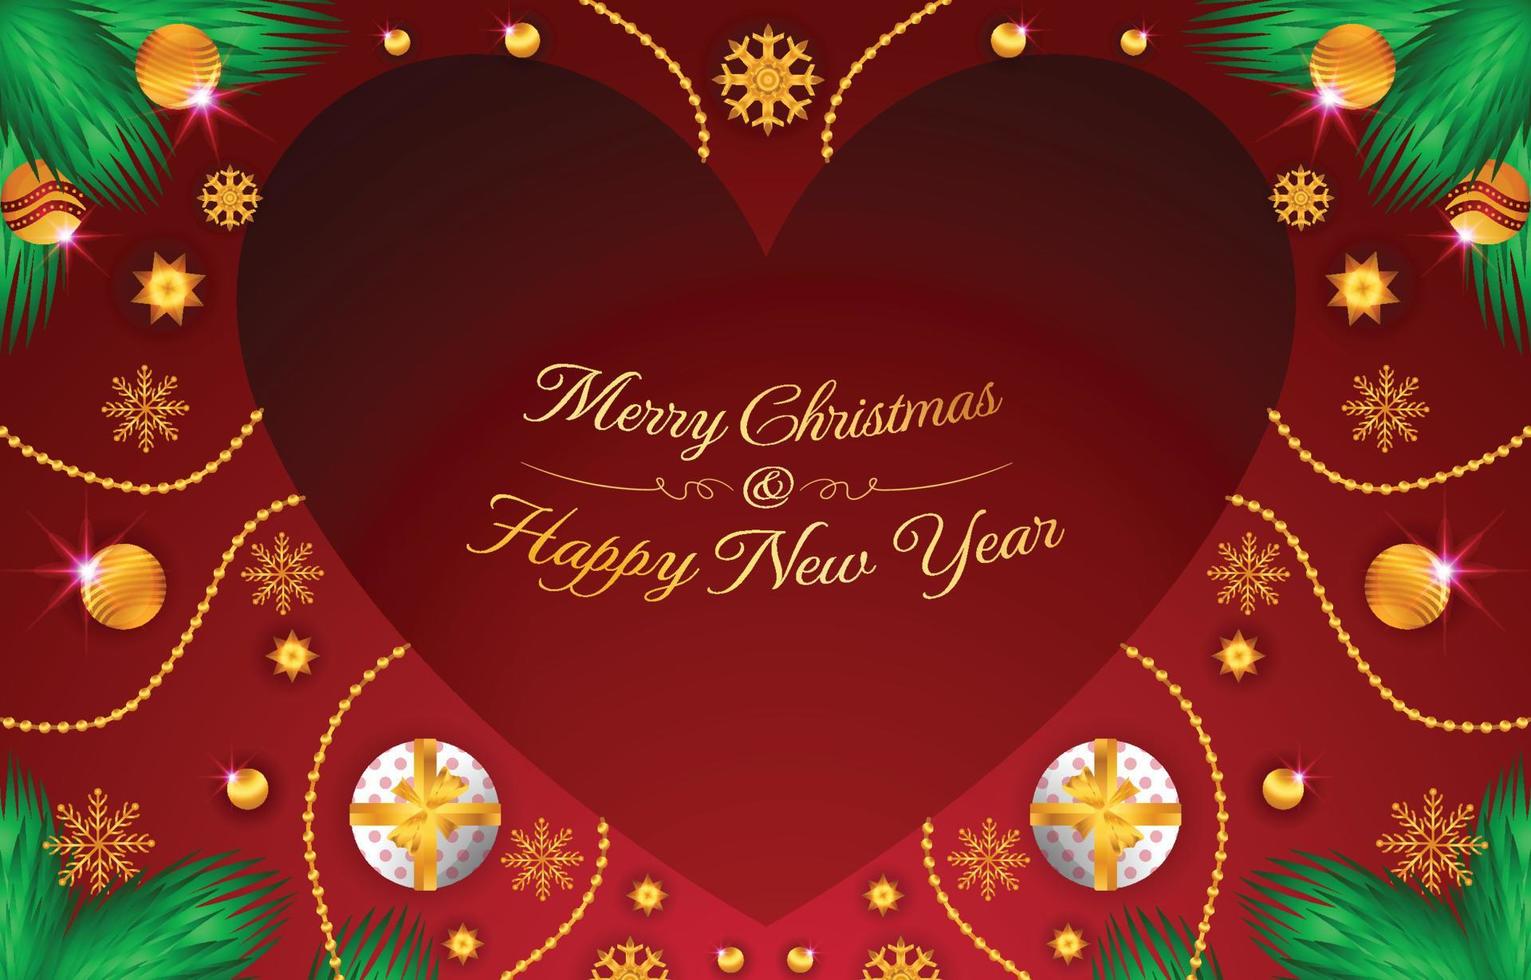 Merry Christmas and Happy New Year Red Background vector